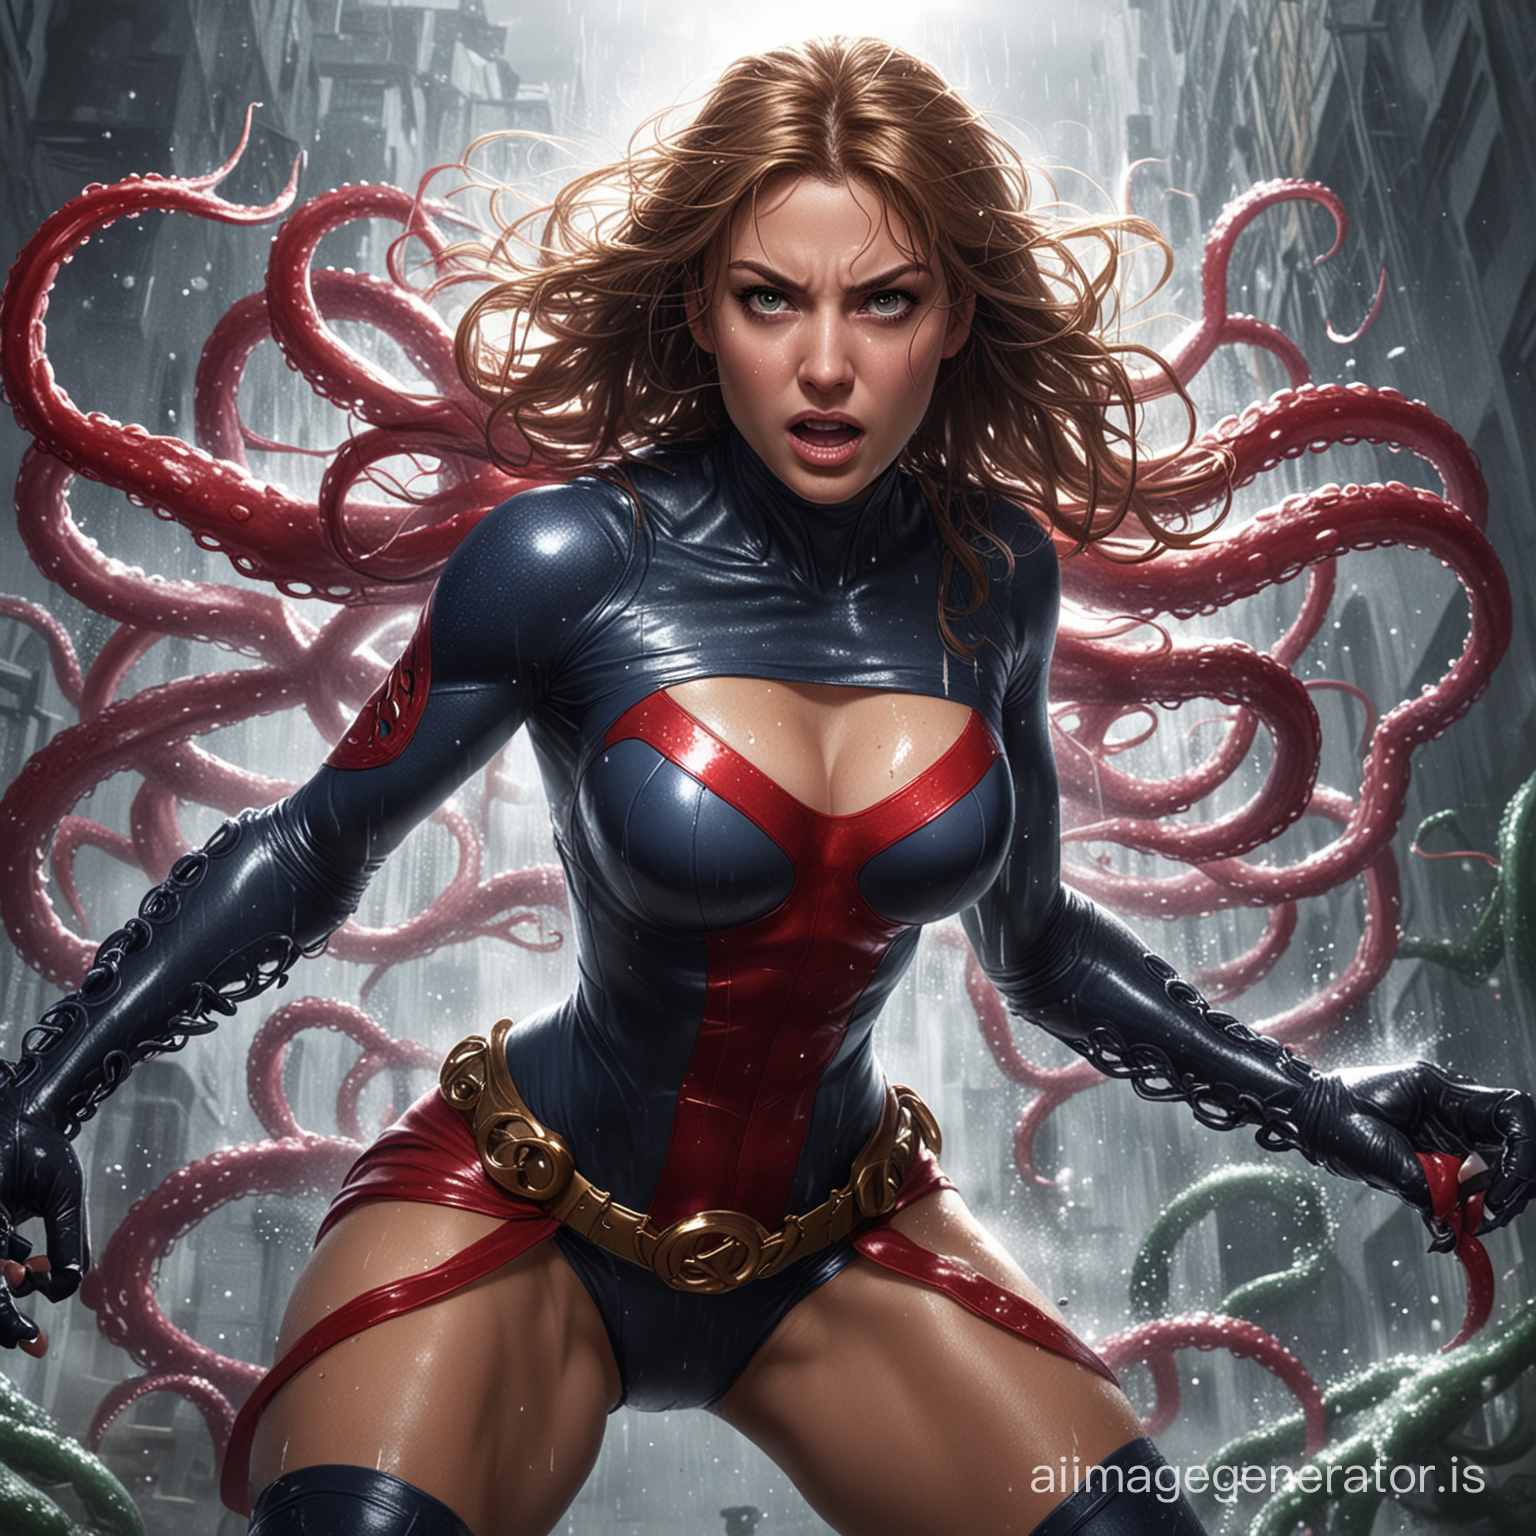 superheroine overpowered by tentacles and sweating